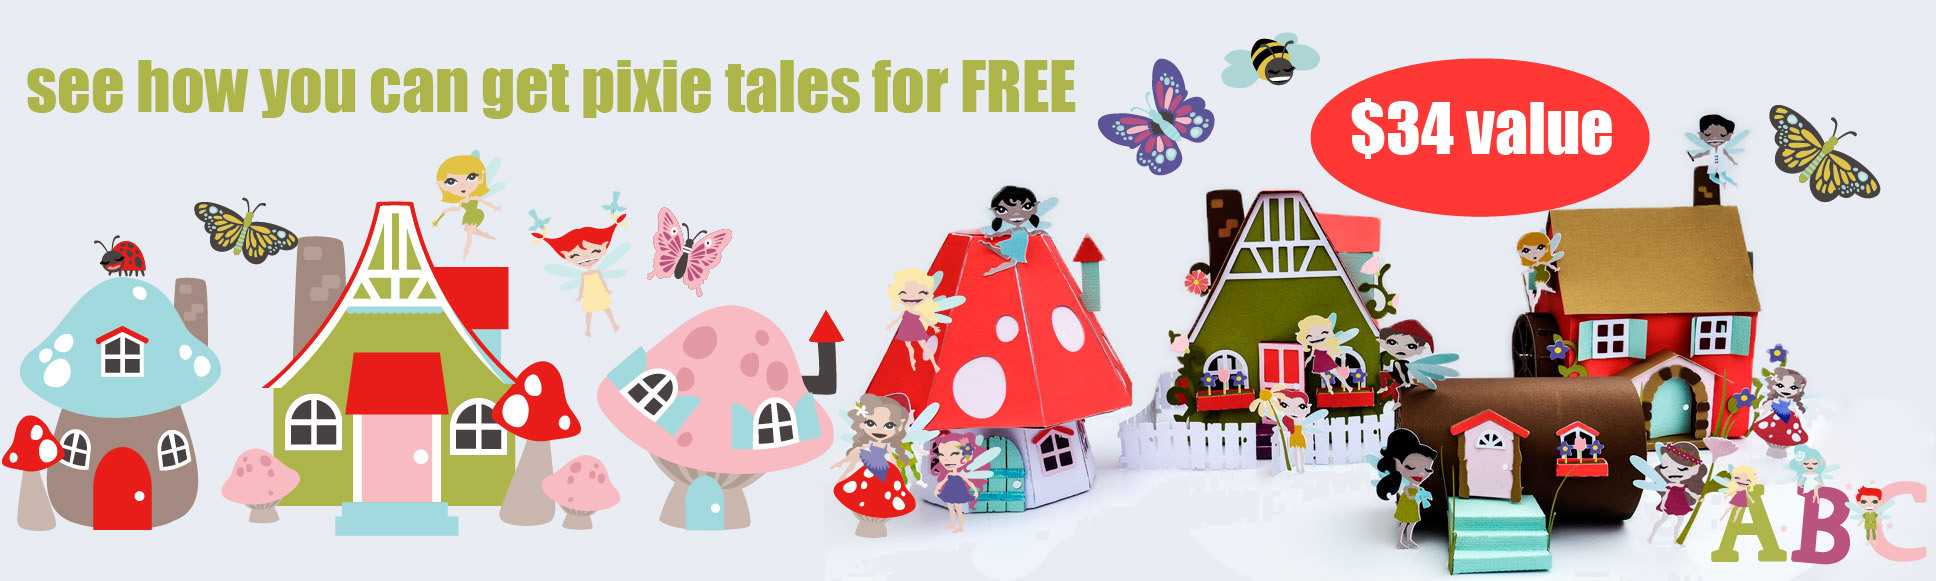 Earn the Pixie Tales - Promotional Bundle - Free